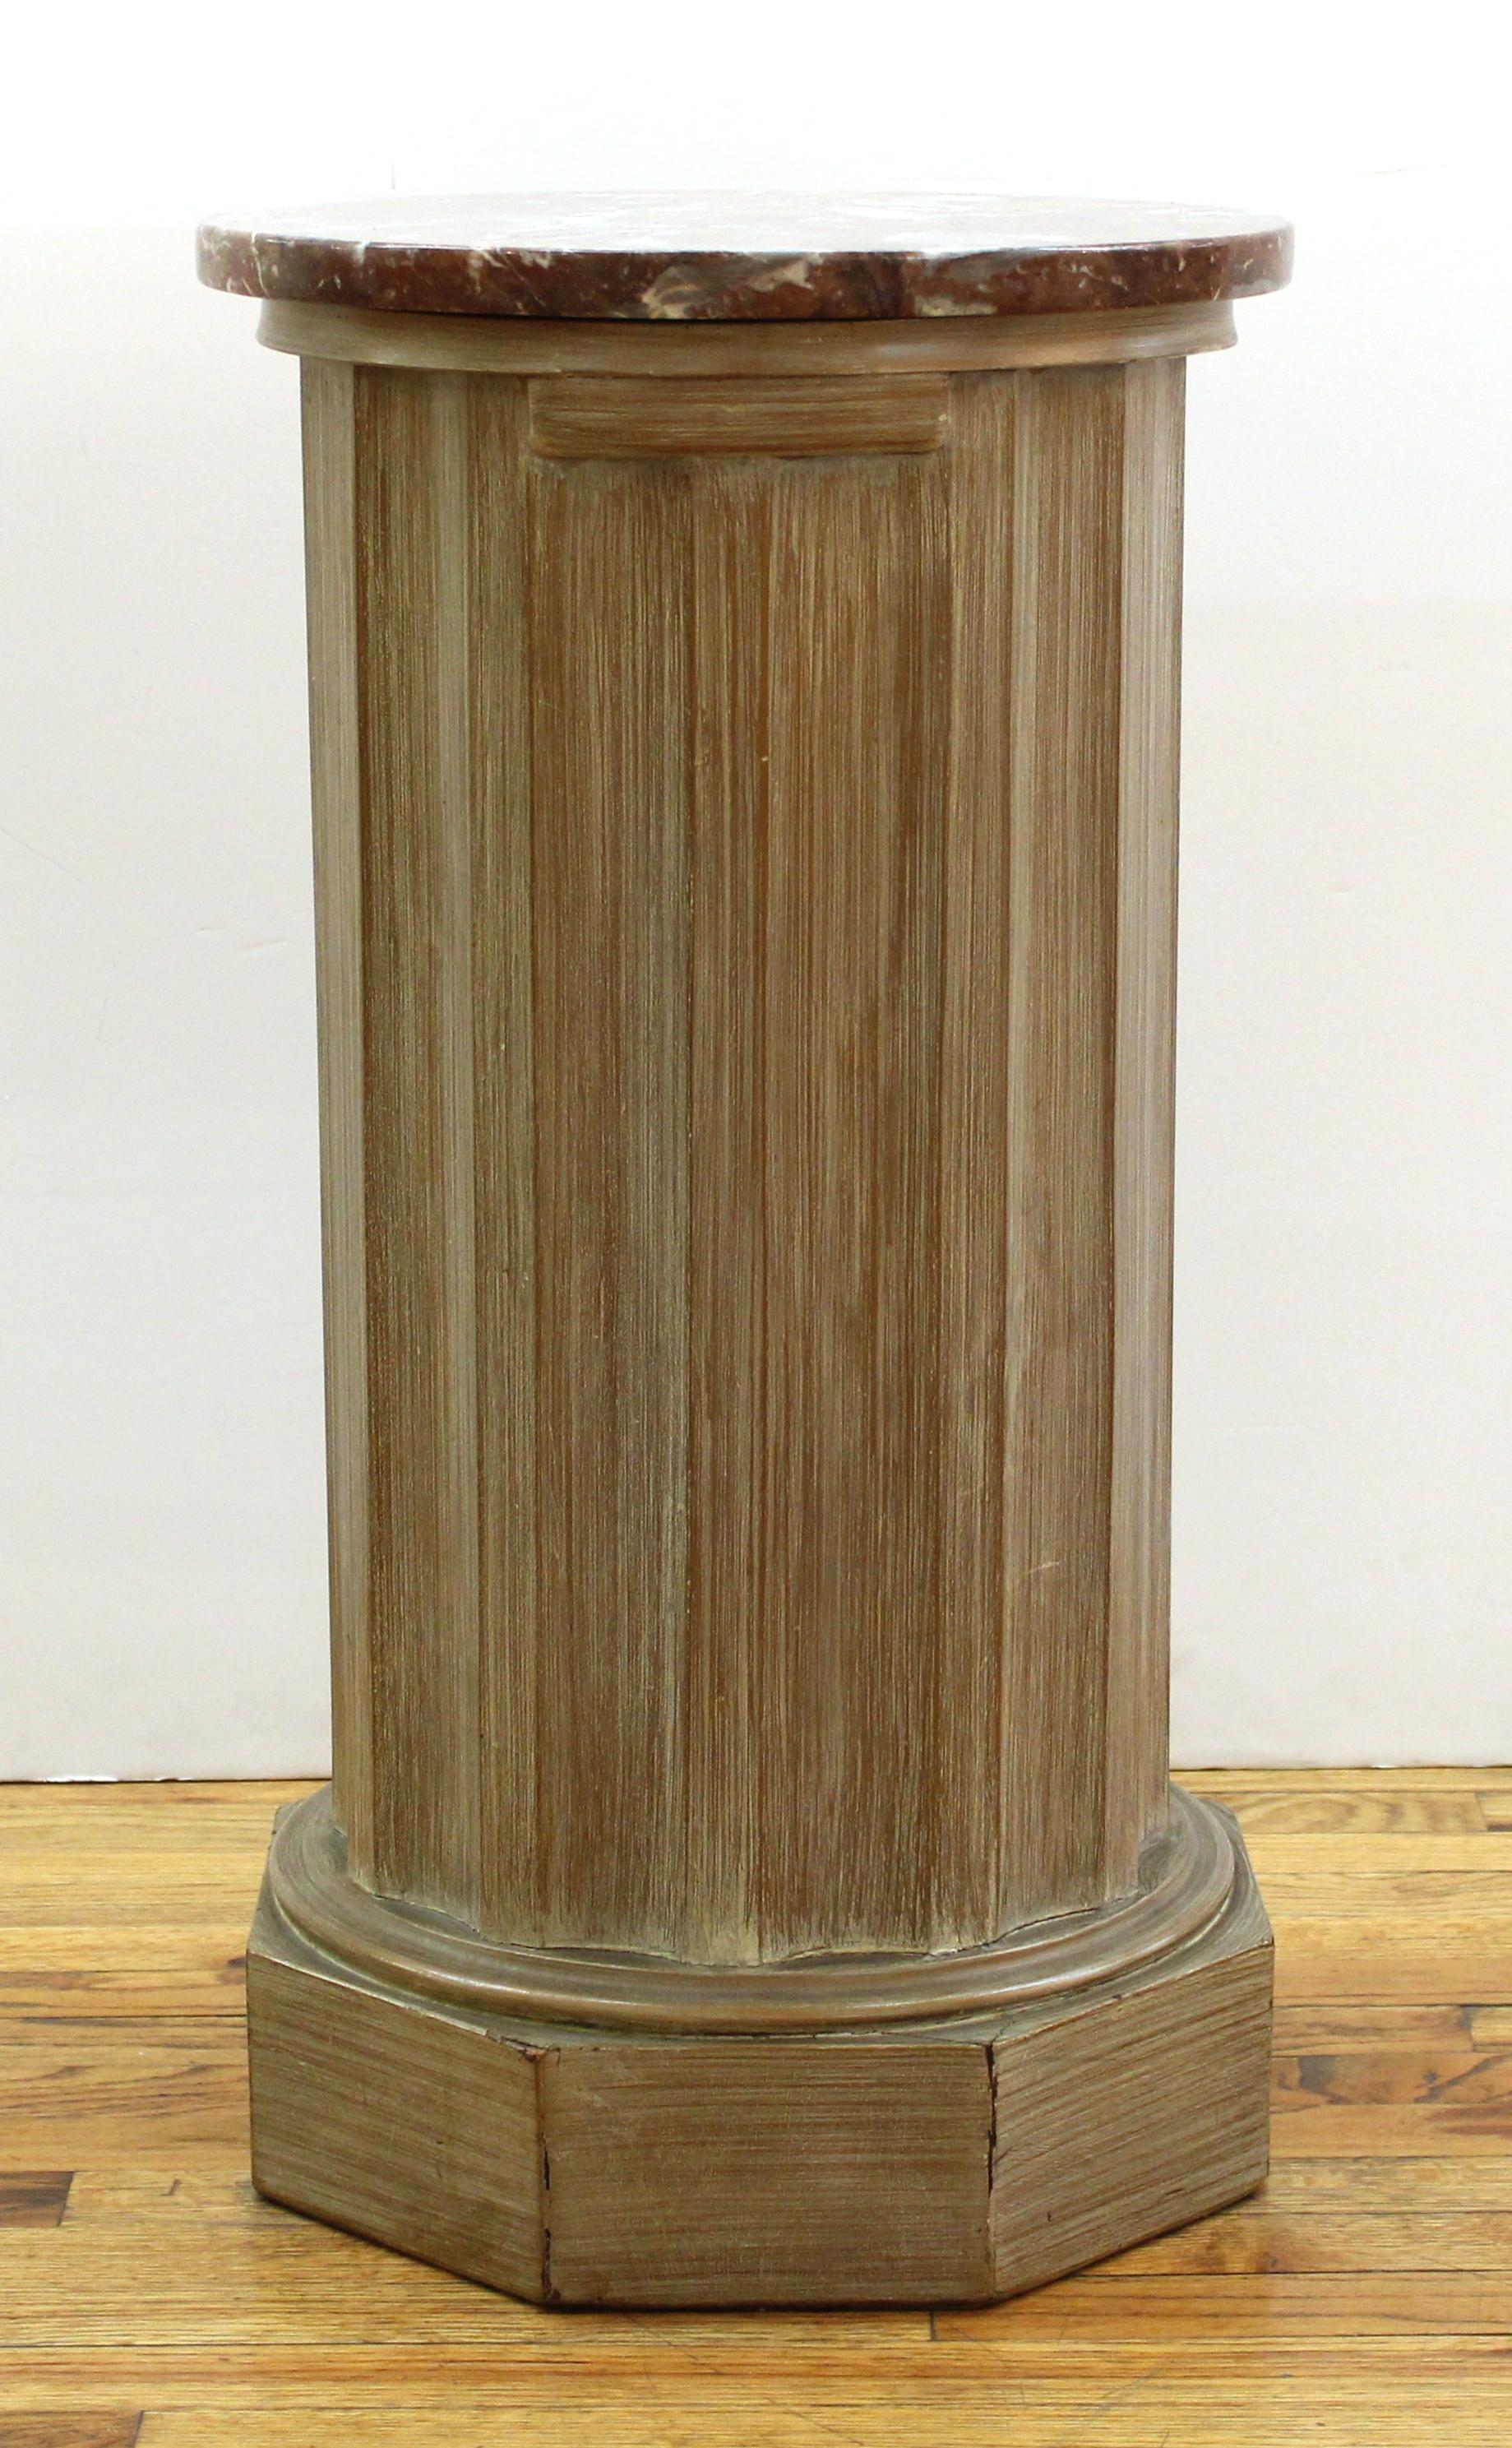 Neoclassical style pedestal stand cabinet in carved wood with round marble top and swing door.